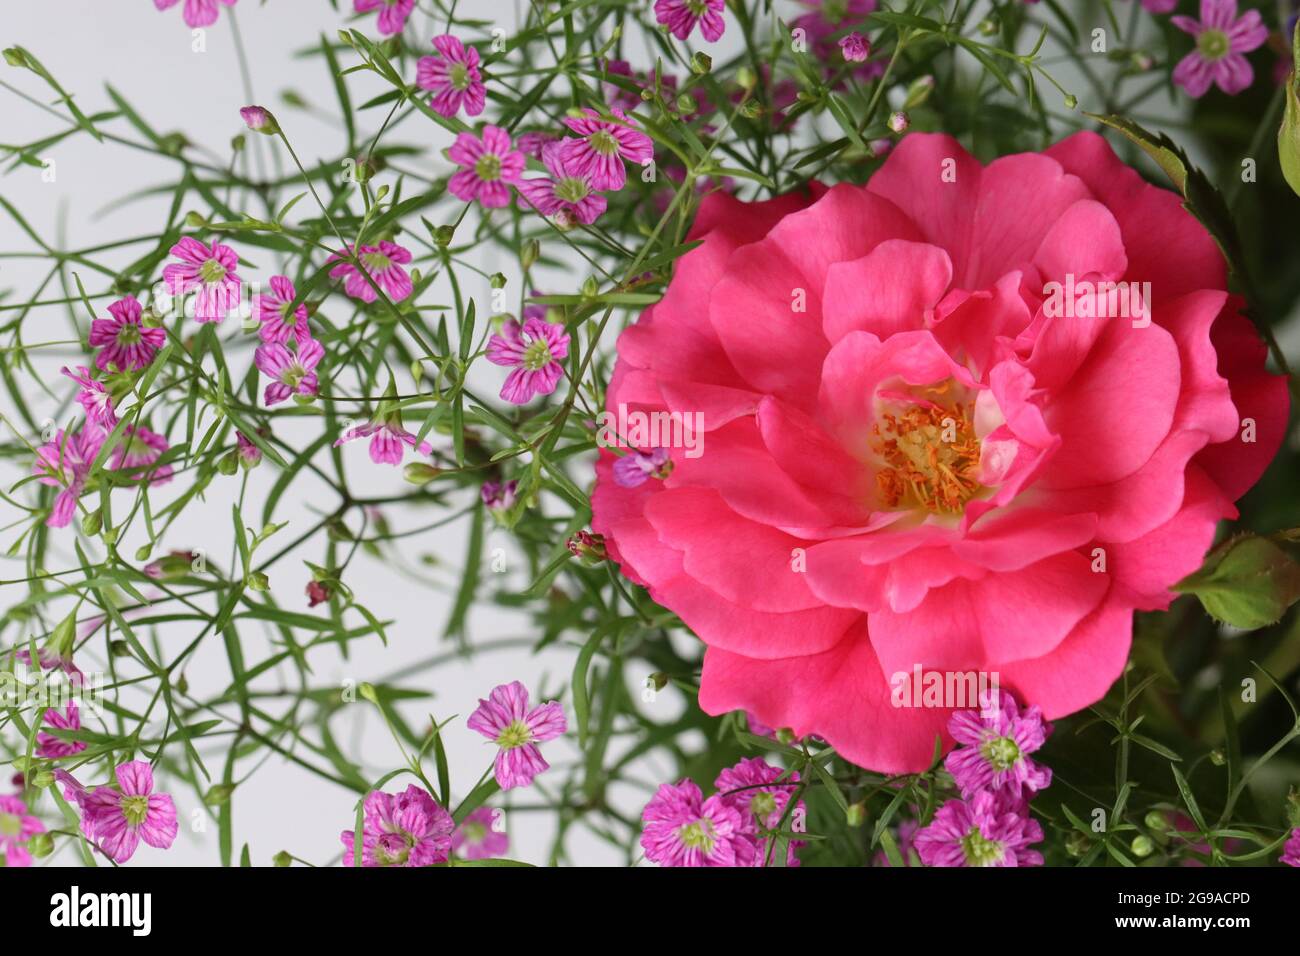 a pink rose blossom and pink gypsophilia is lying on white background Stock Photo